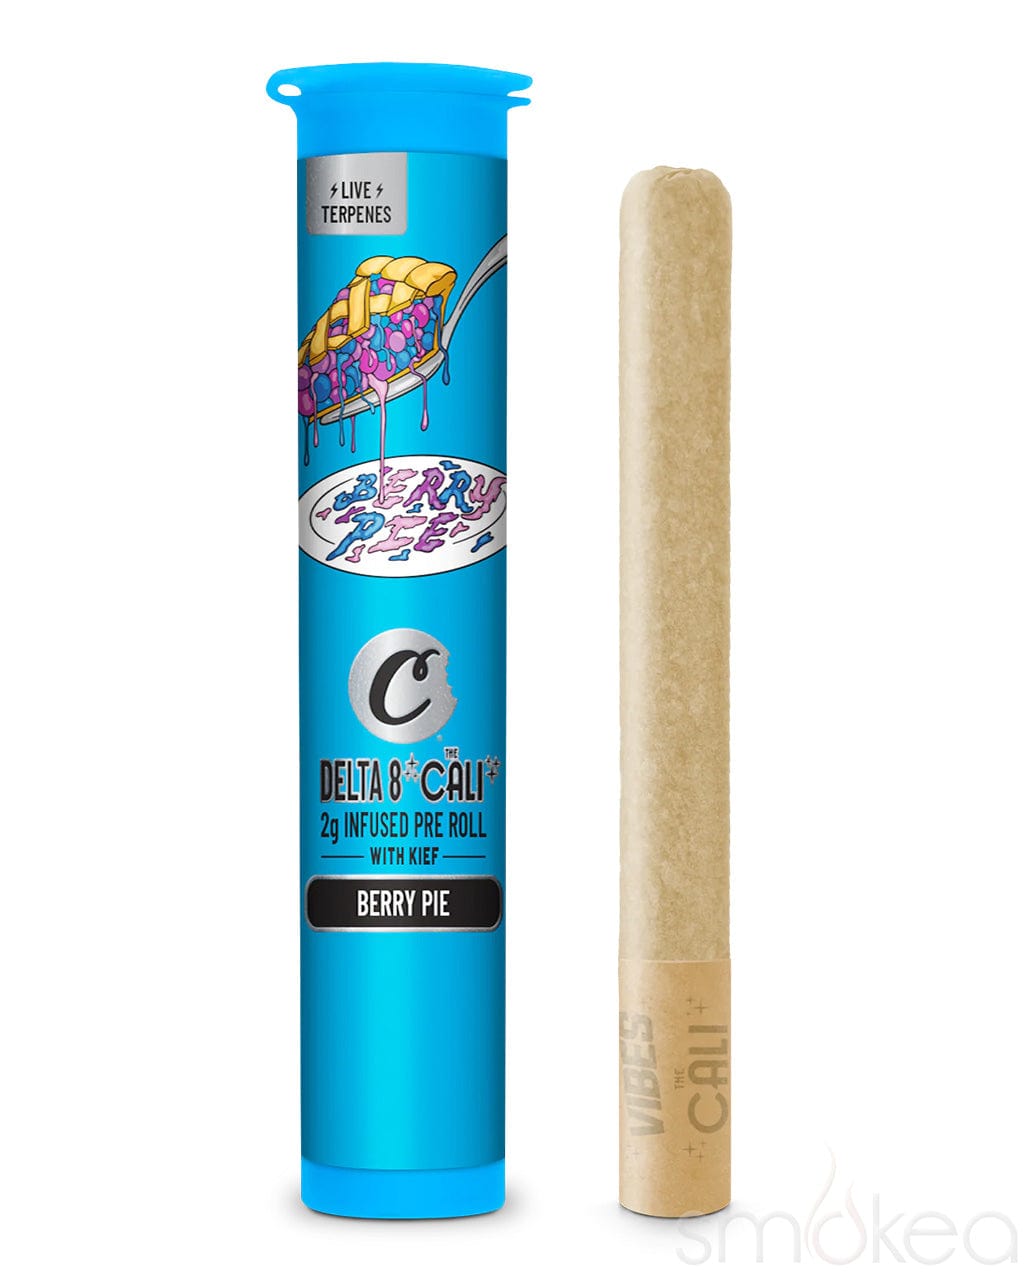 Cookies 2g Delta 8 Cali Infused Preroll - Berry Pie